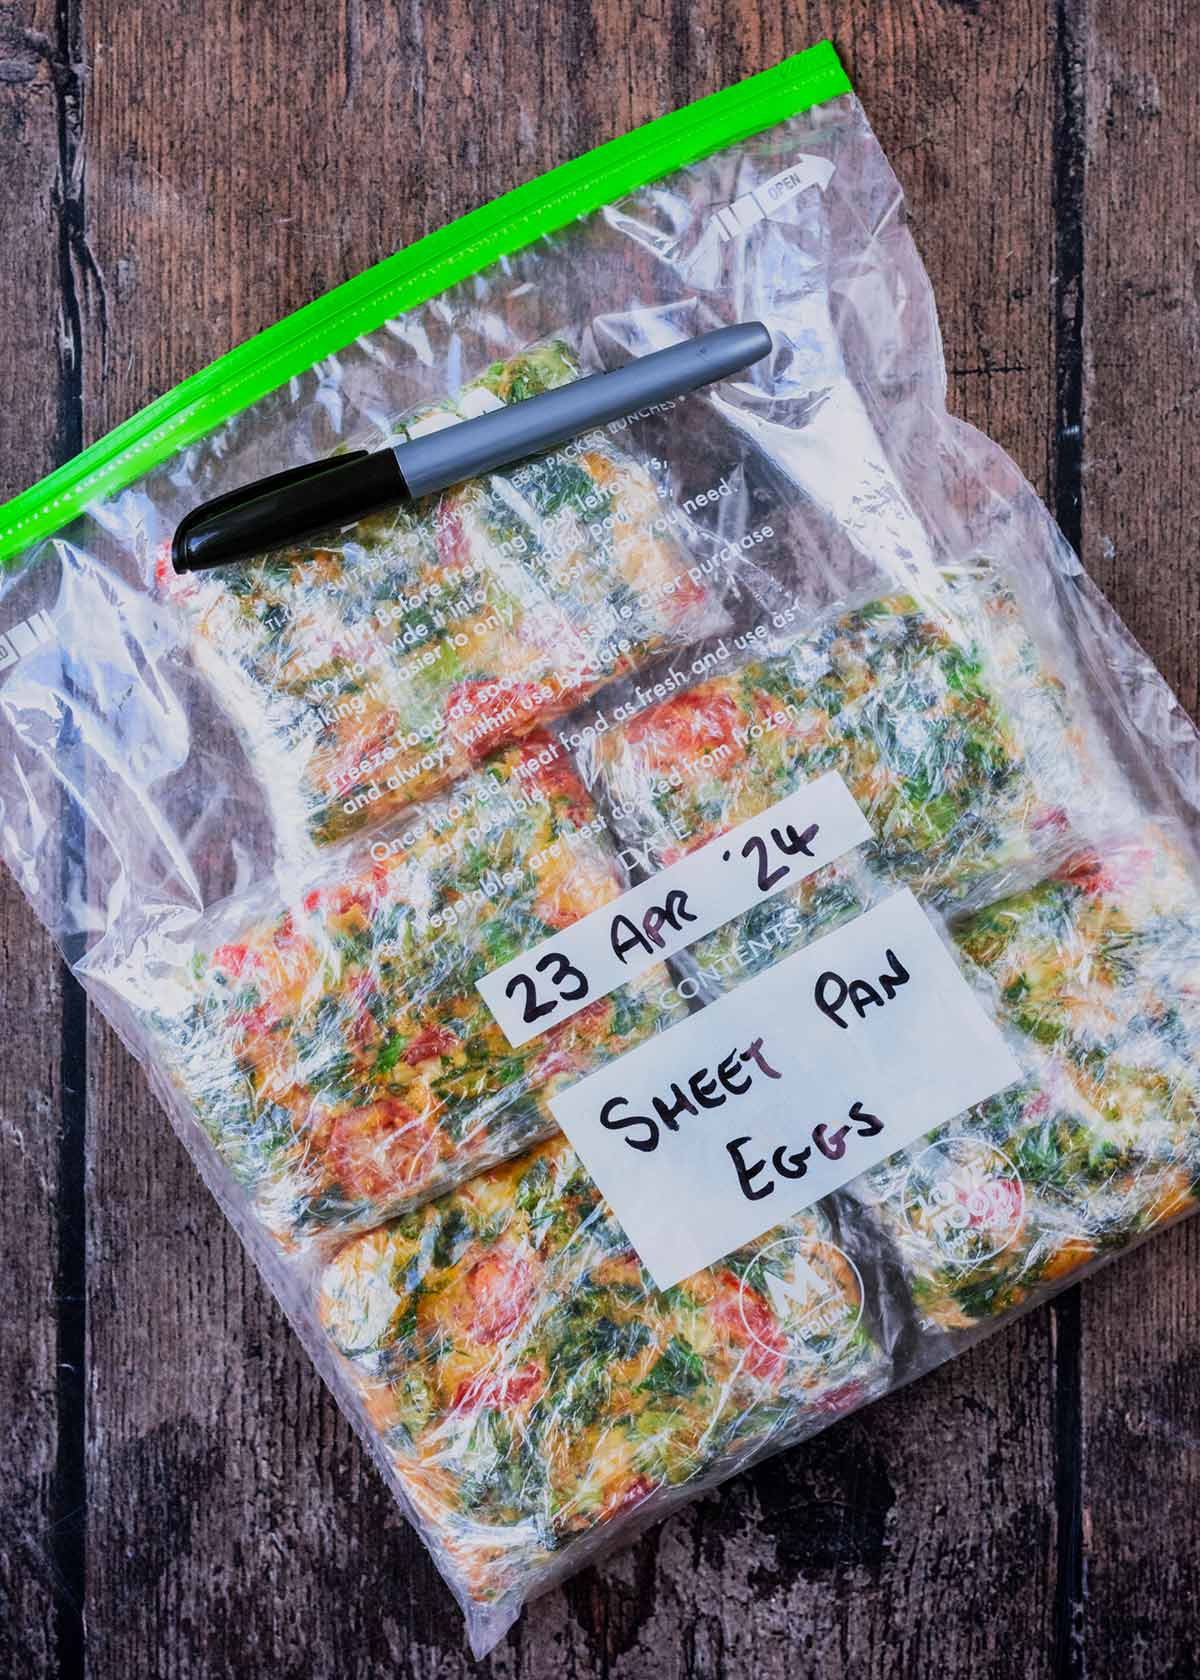 A ziplock bag of wrapped  egg bake with the date written on the bag.